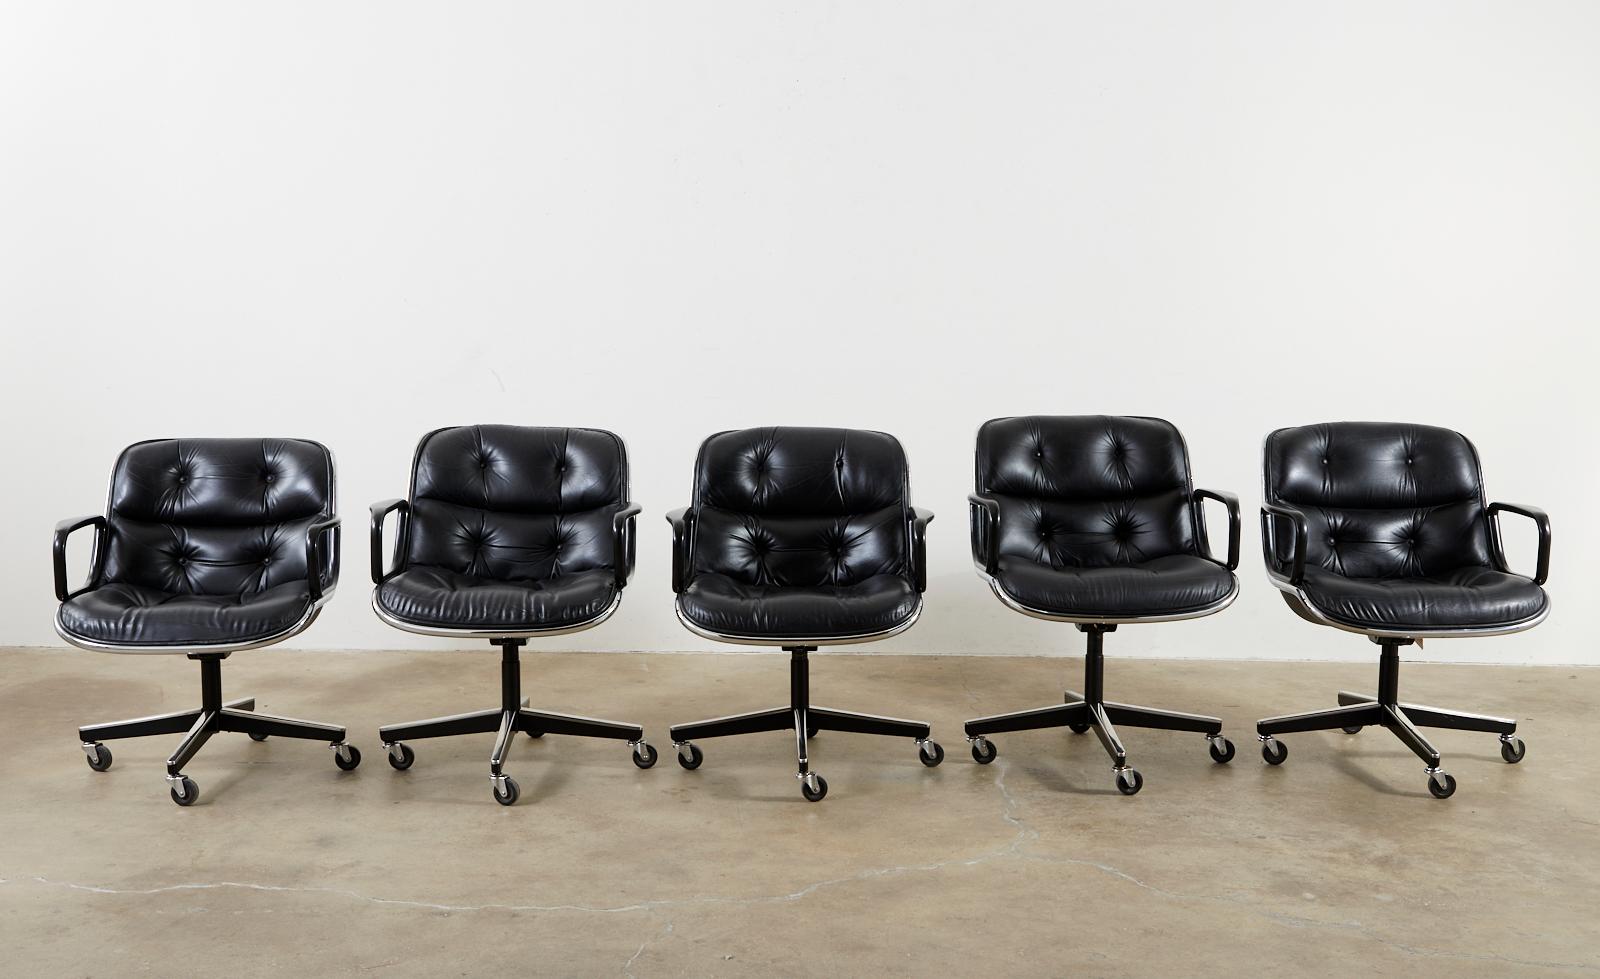 Set of fifteen. matching executive office desk armchairs designed by Charles Pollock for Knoll in 1963. The chairs feature a tufted black supple leather upholstery and a tilt-swivel movement of 360 degrees. The chairs adjust from 31-36 inches high